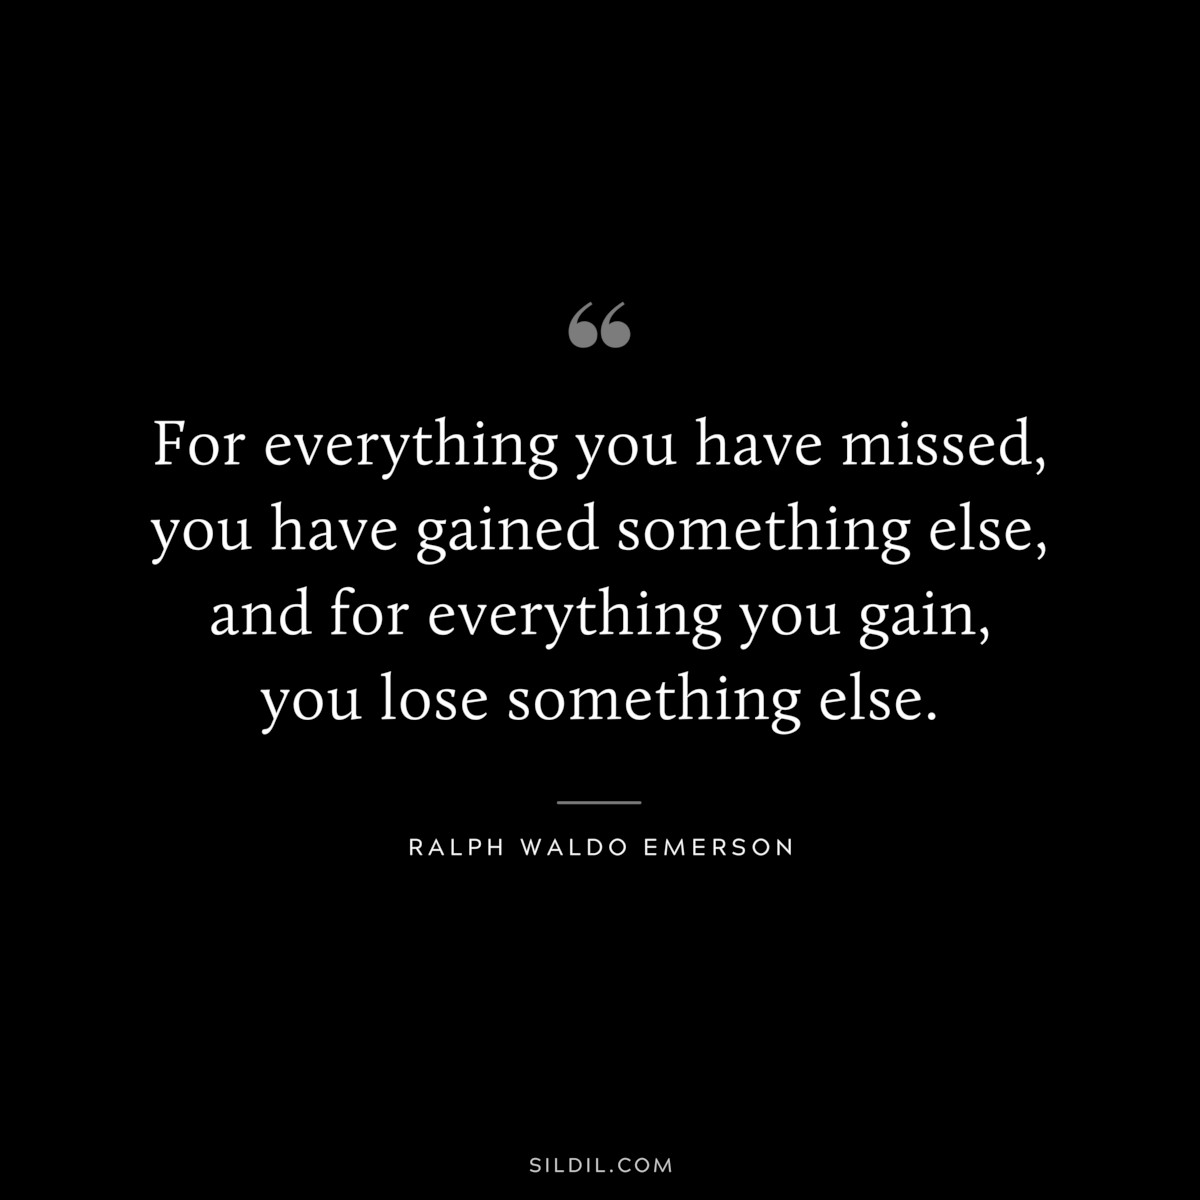 For everything you have missed, you have gained something else, and for everything you gain, you lose something else. — Ralph Waldo Emerson